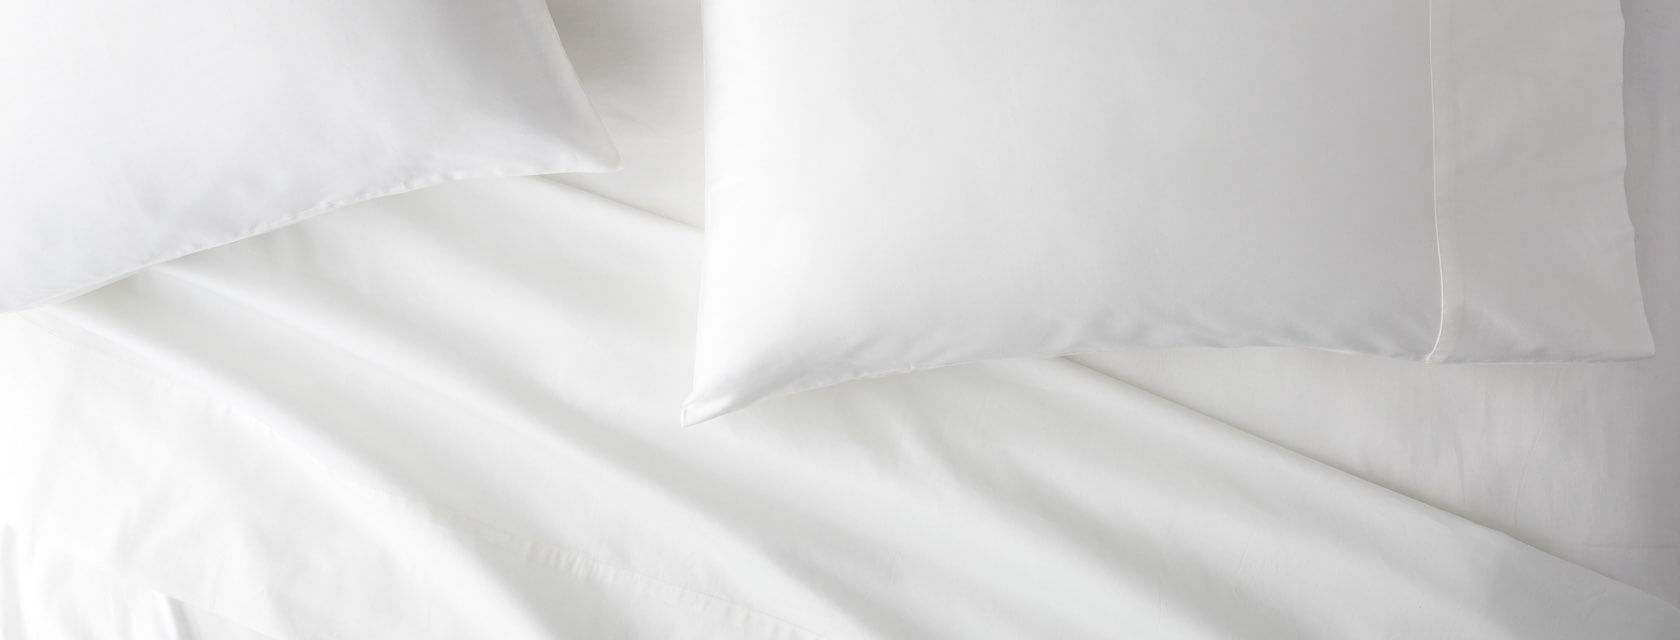 Saatva Signature Sateen sheets and pillows on a bed.